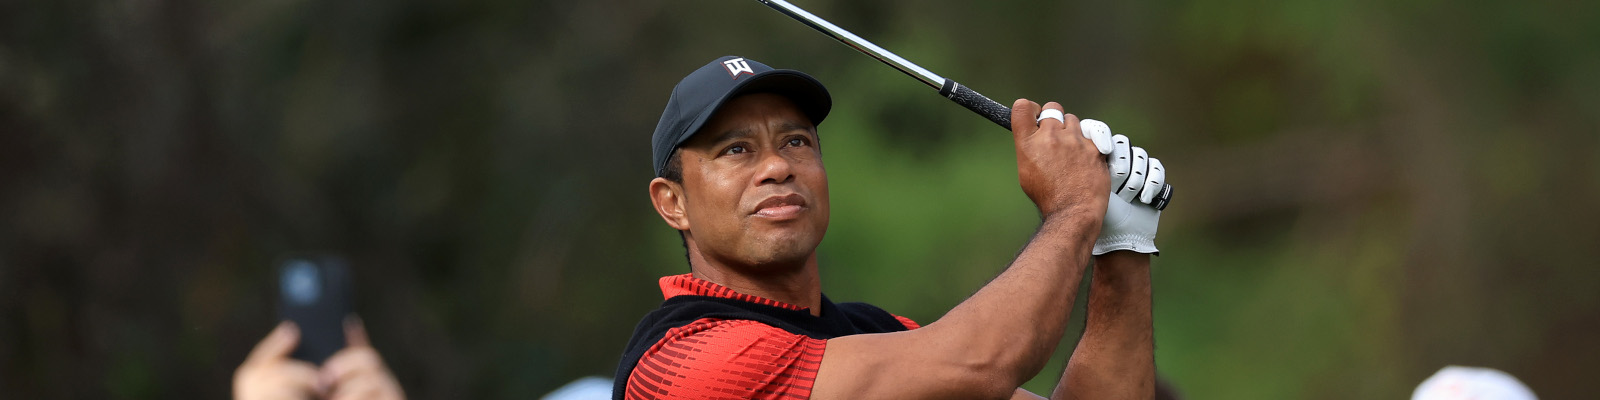 Tiger Woods (Photo by Getty Images)